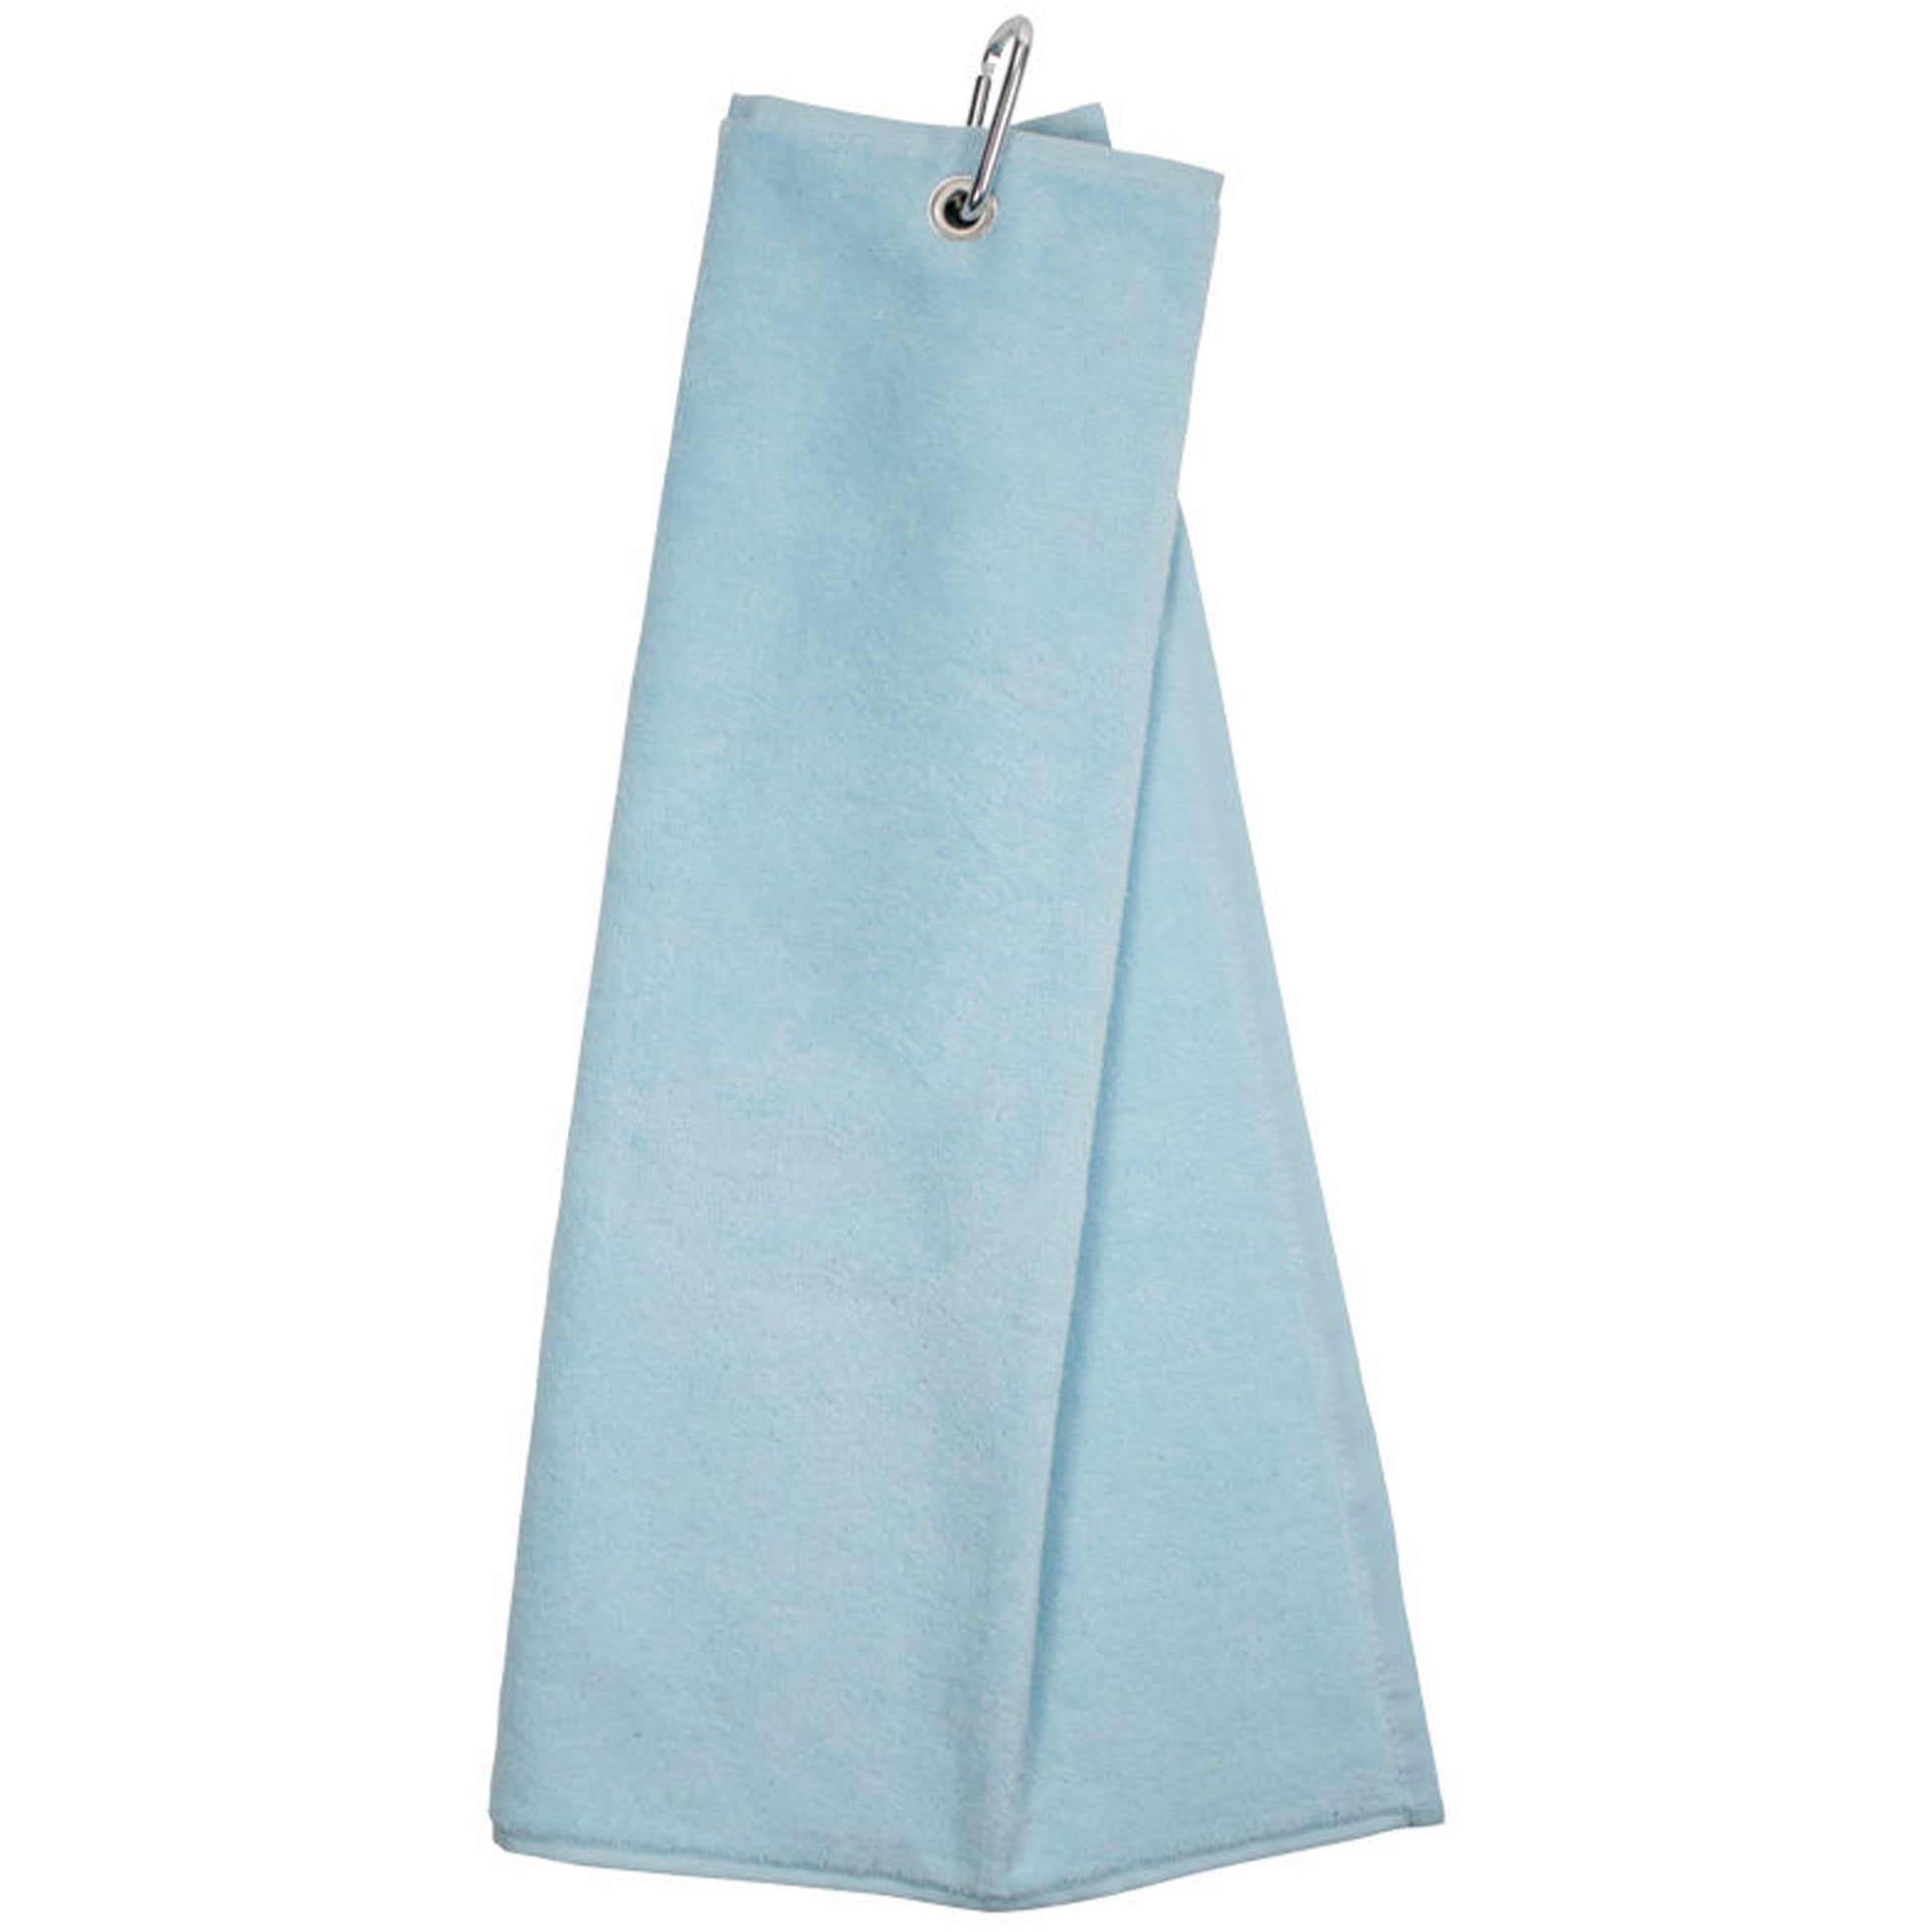 Personalised Embroidered Tri Fold GOLF Towel Trifold Towel with Carabiner Clip  - Always Looking Good - Light Blue  